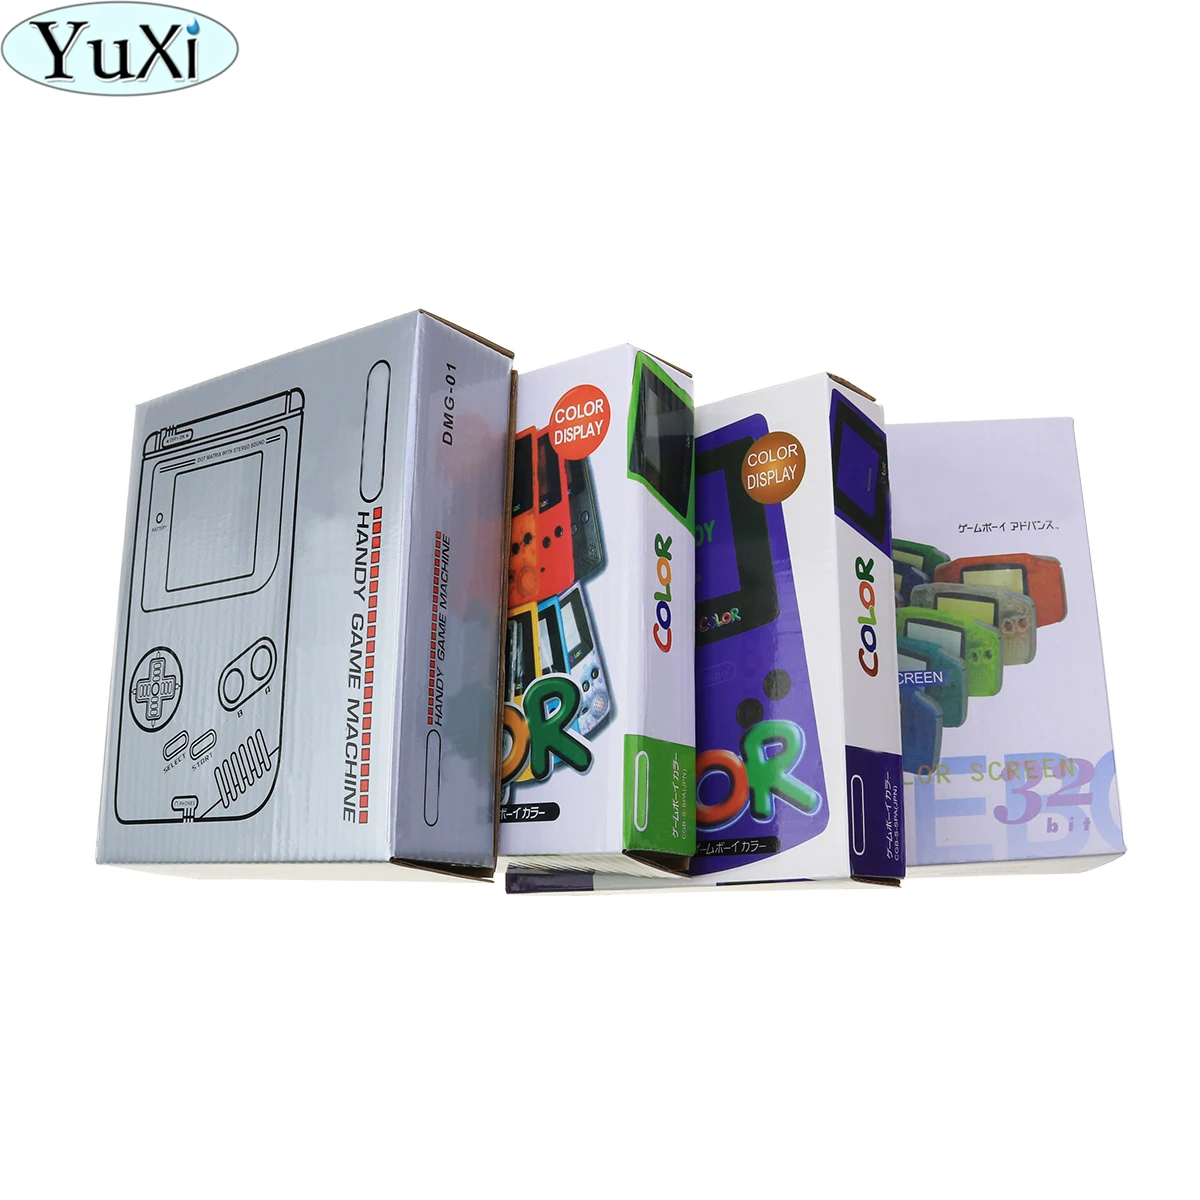 

YuXi For GBA GBC GBA SP GB DMG Game Console New Packing Box Carton for Gameboy Advance Color New Packaging Protect Box